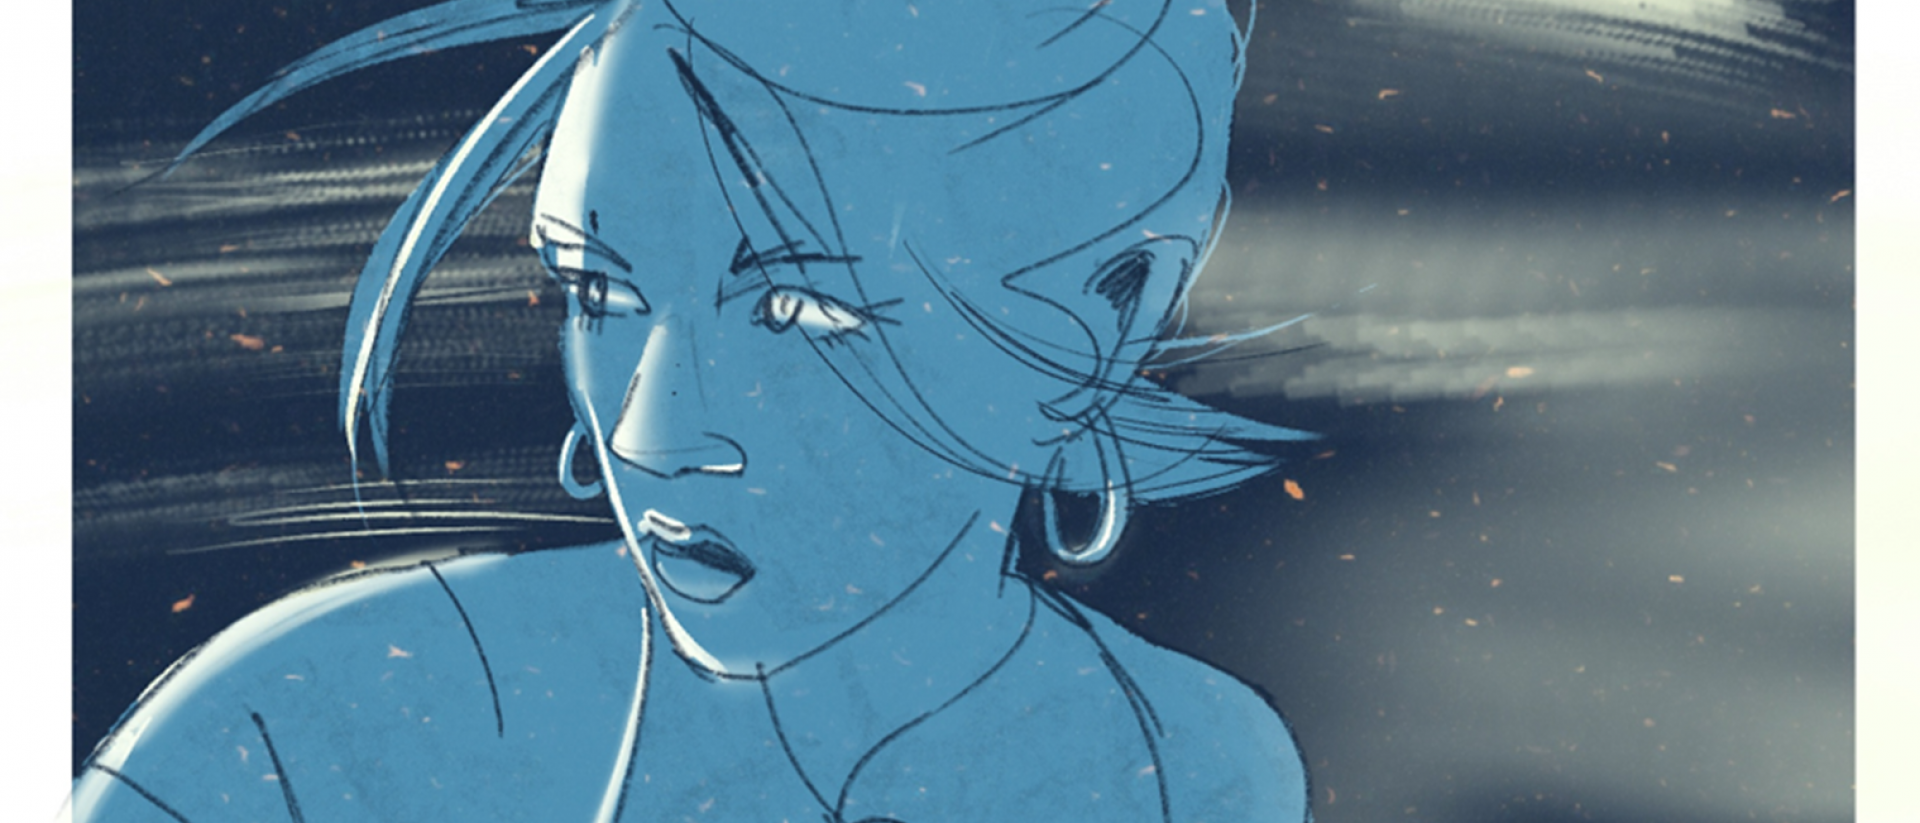 concept sketch from animated short film holm featuring a woman in blue light